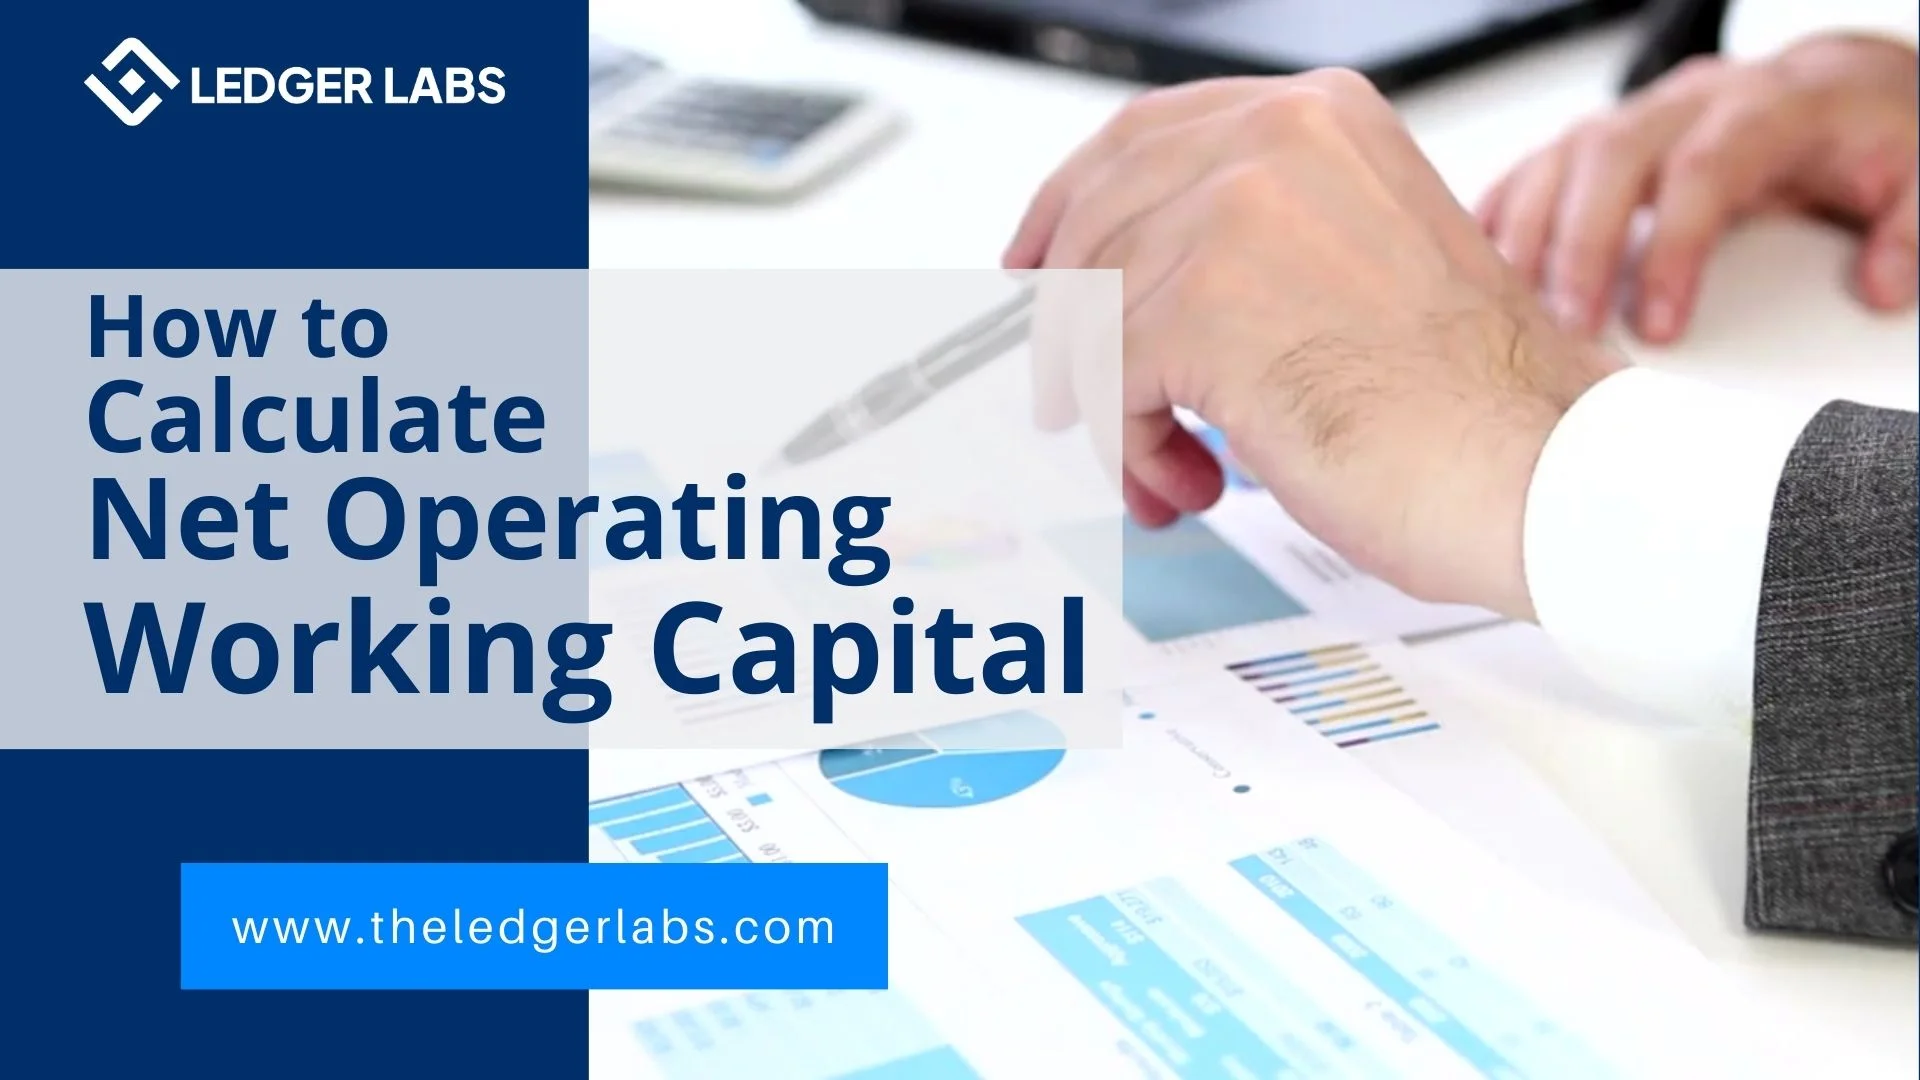 How to Calculate Net Operating Working Capital